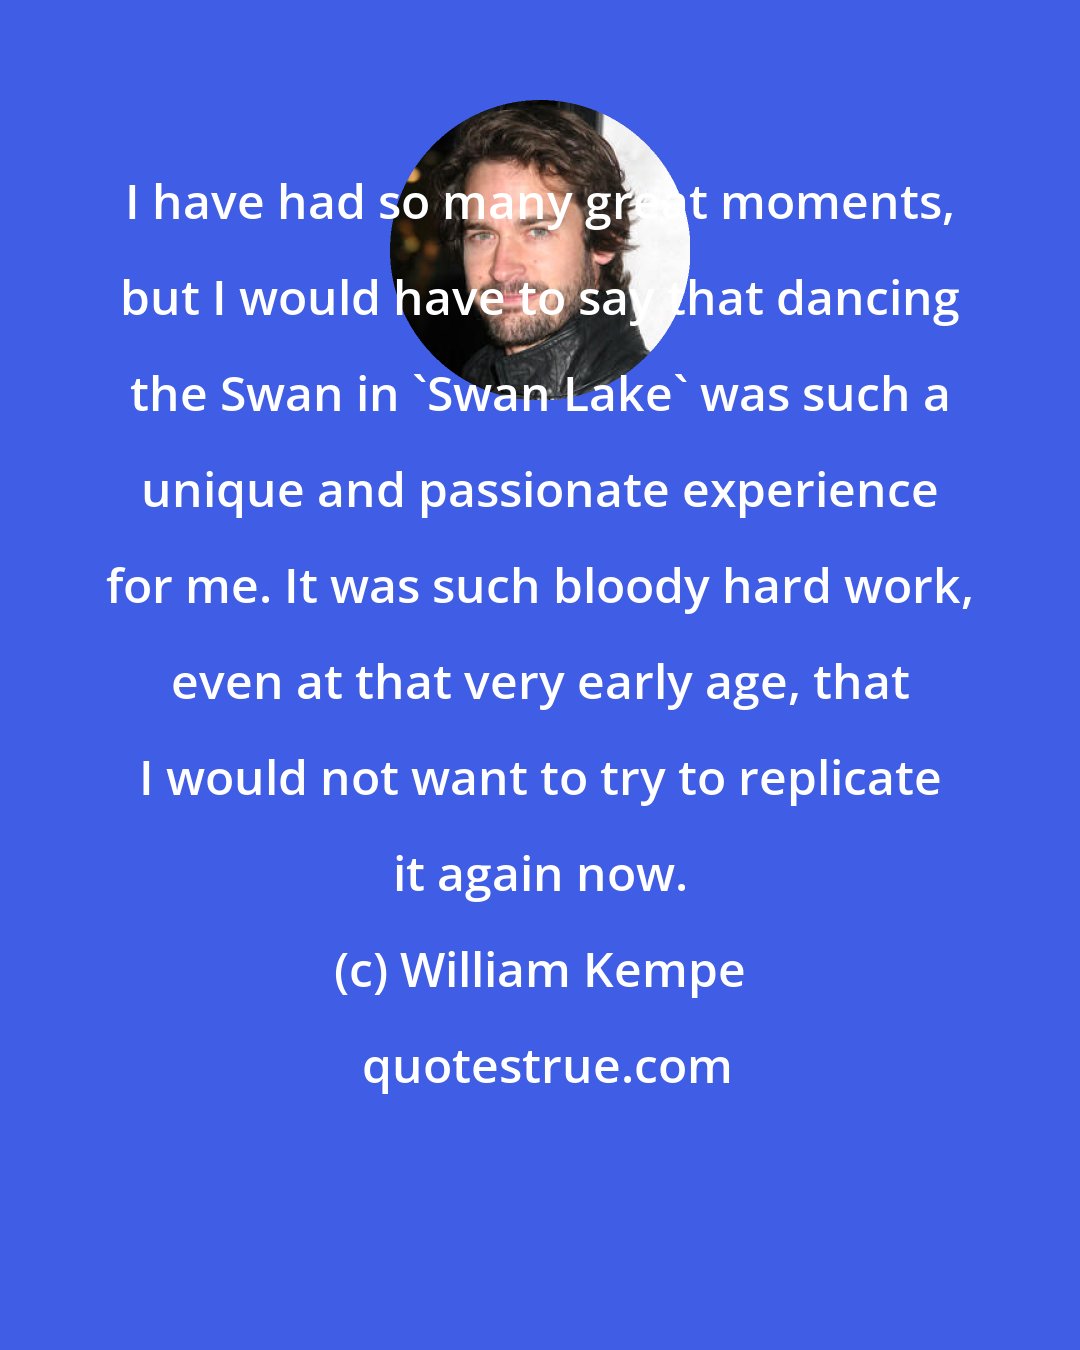 William Kempe: I have had so many great moments, but I would have to say that dancing the Swan in 'Swan Lake' was such a unique and passionate experience for me. It was such bloody hard work, even at that very early age, that I would not want to try to replicate it again now.